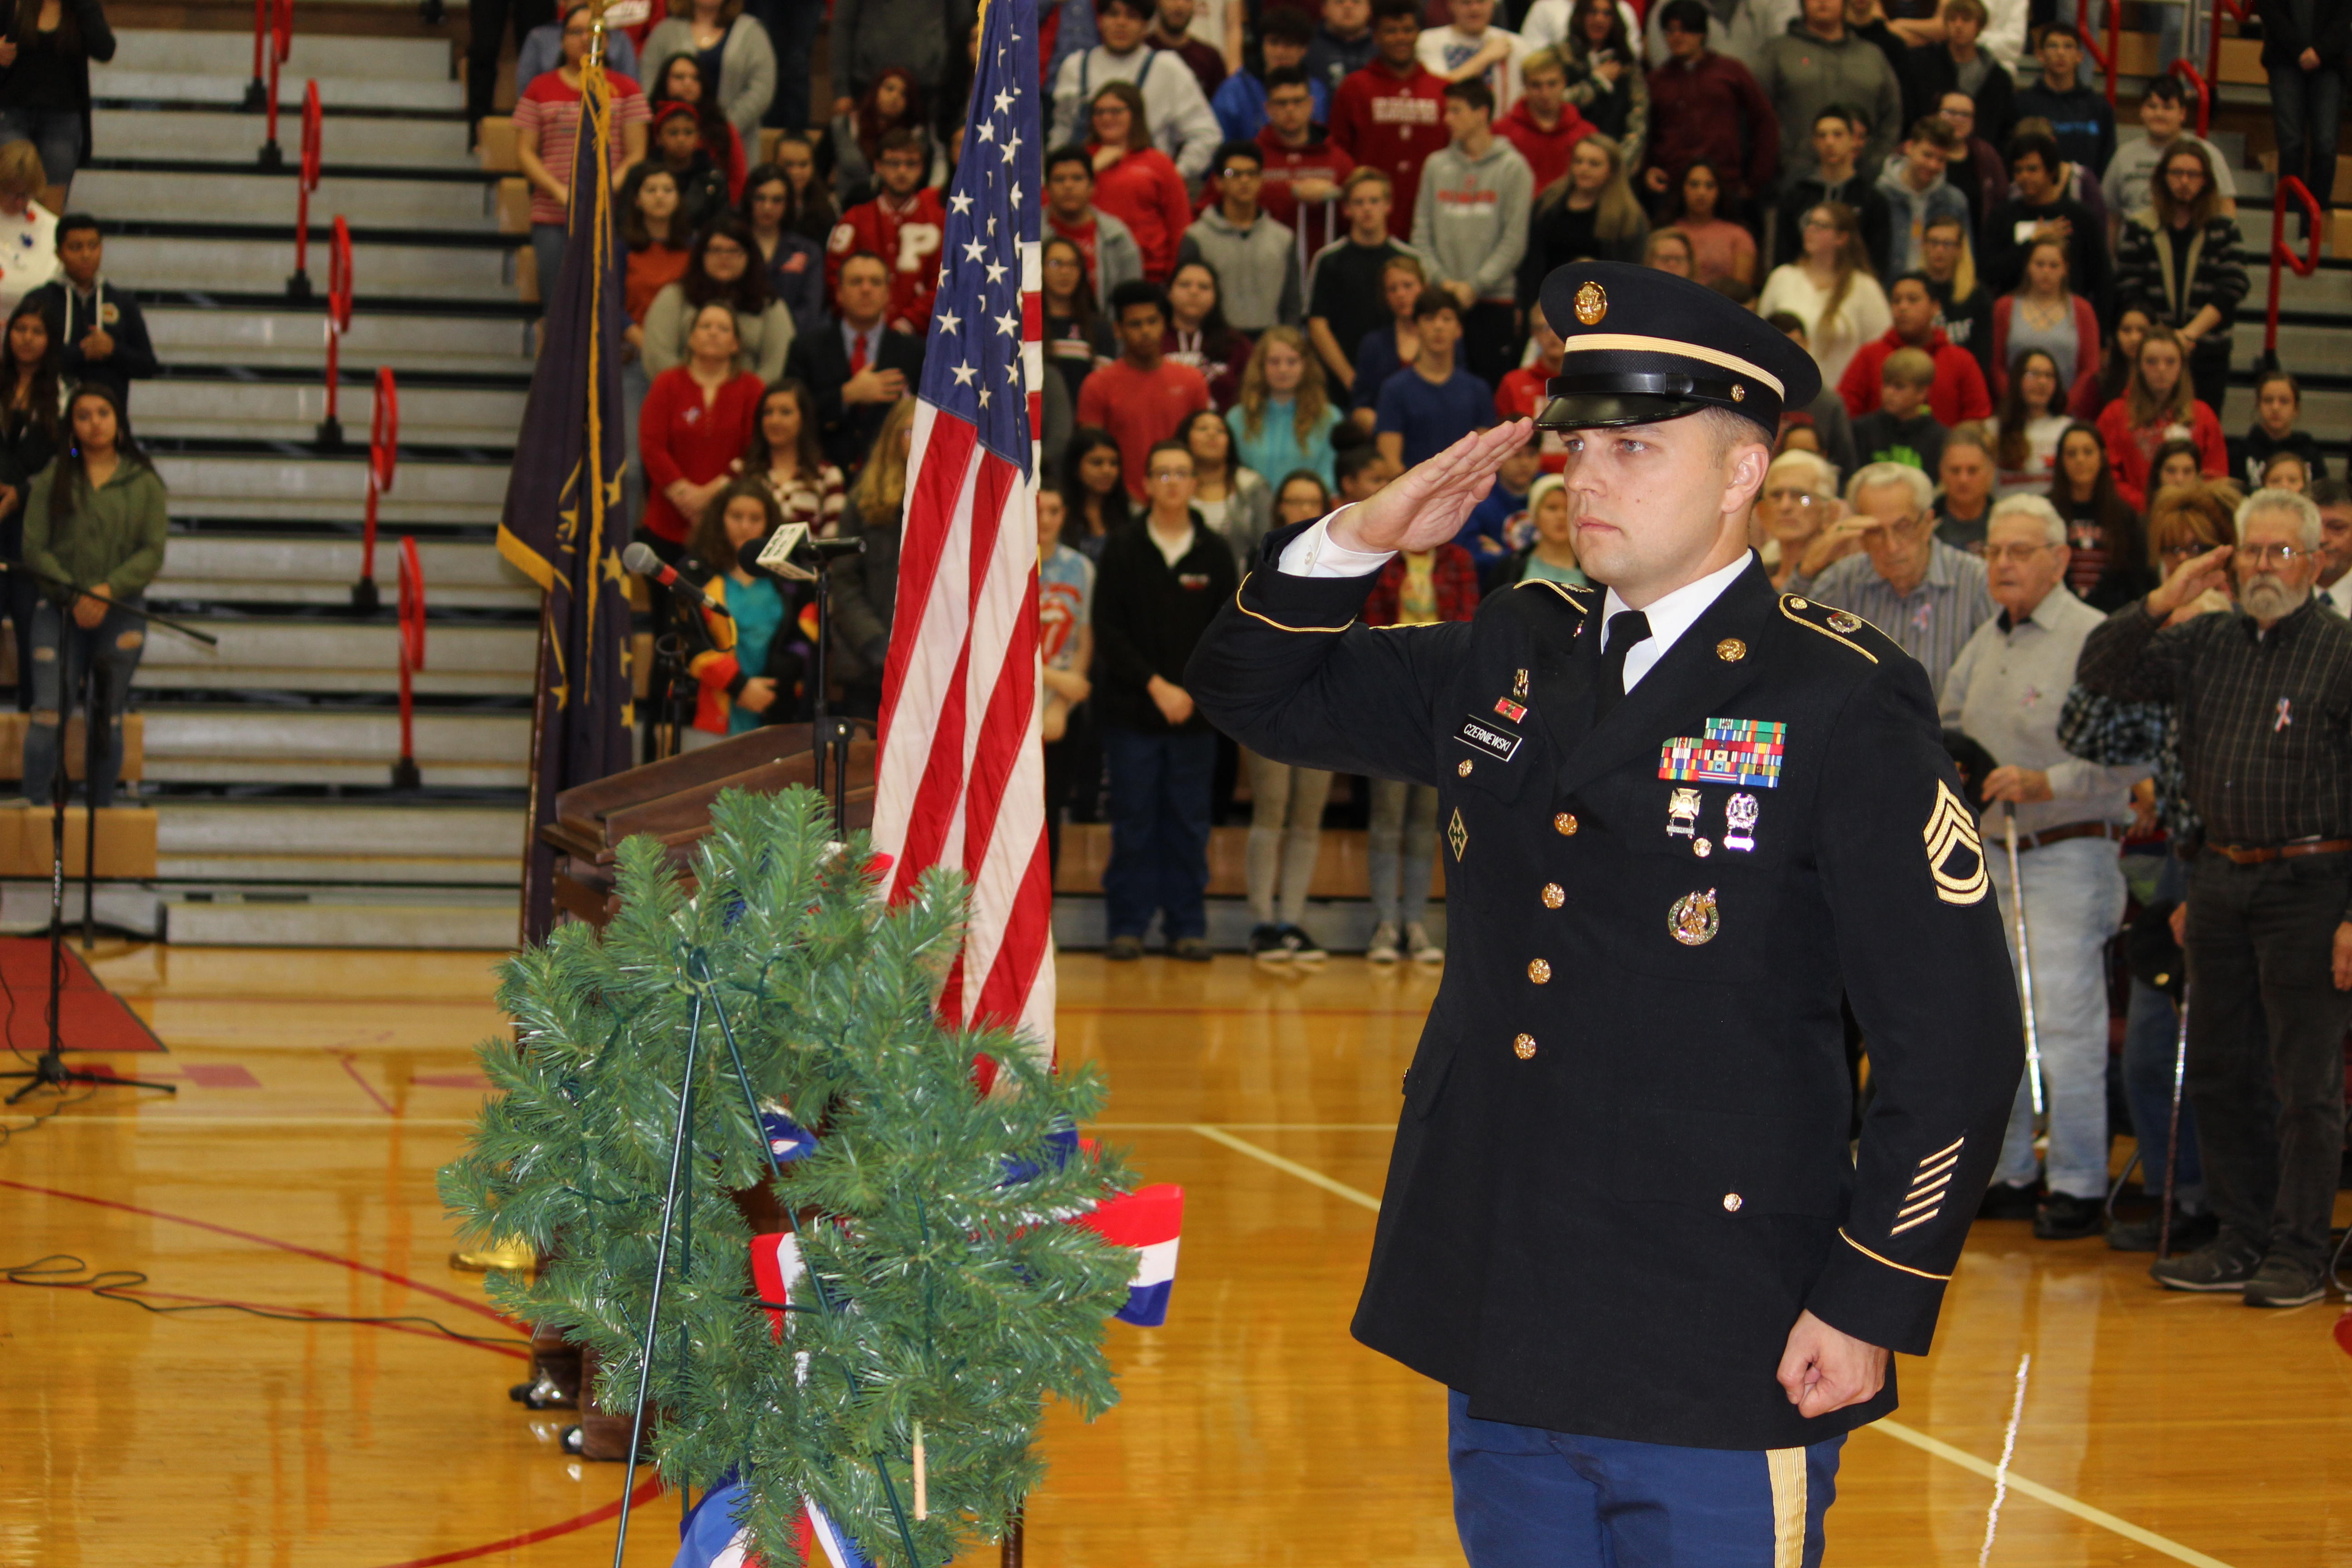 Service man presenting the wreath for Veterans Day.